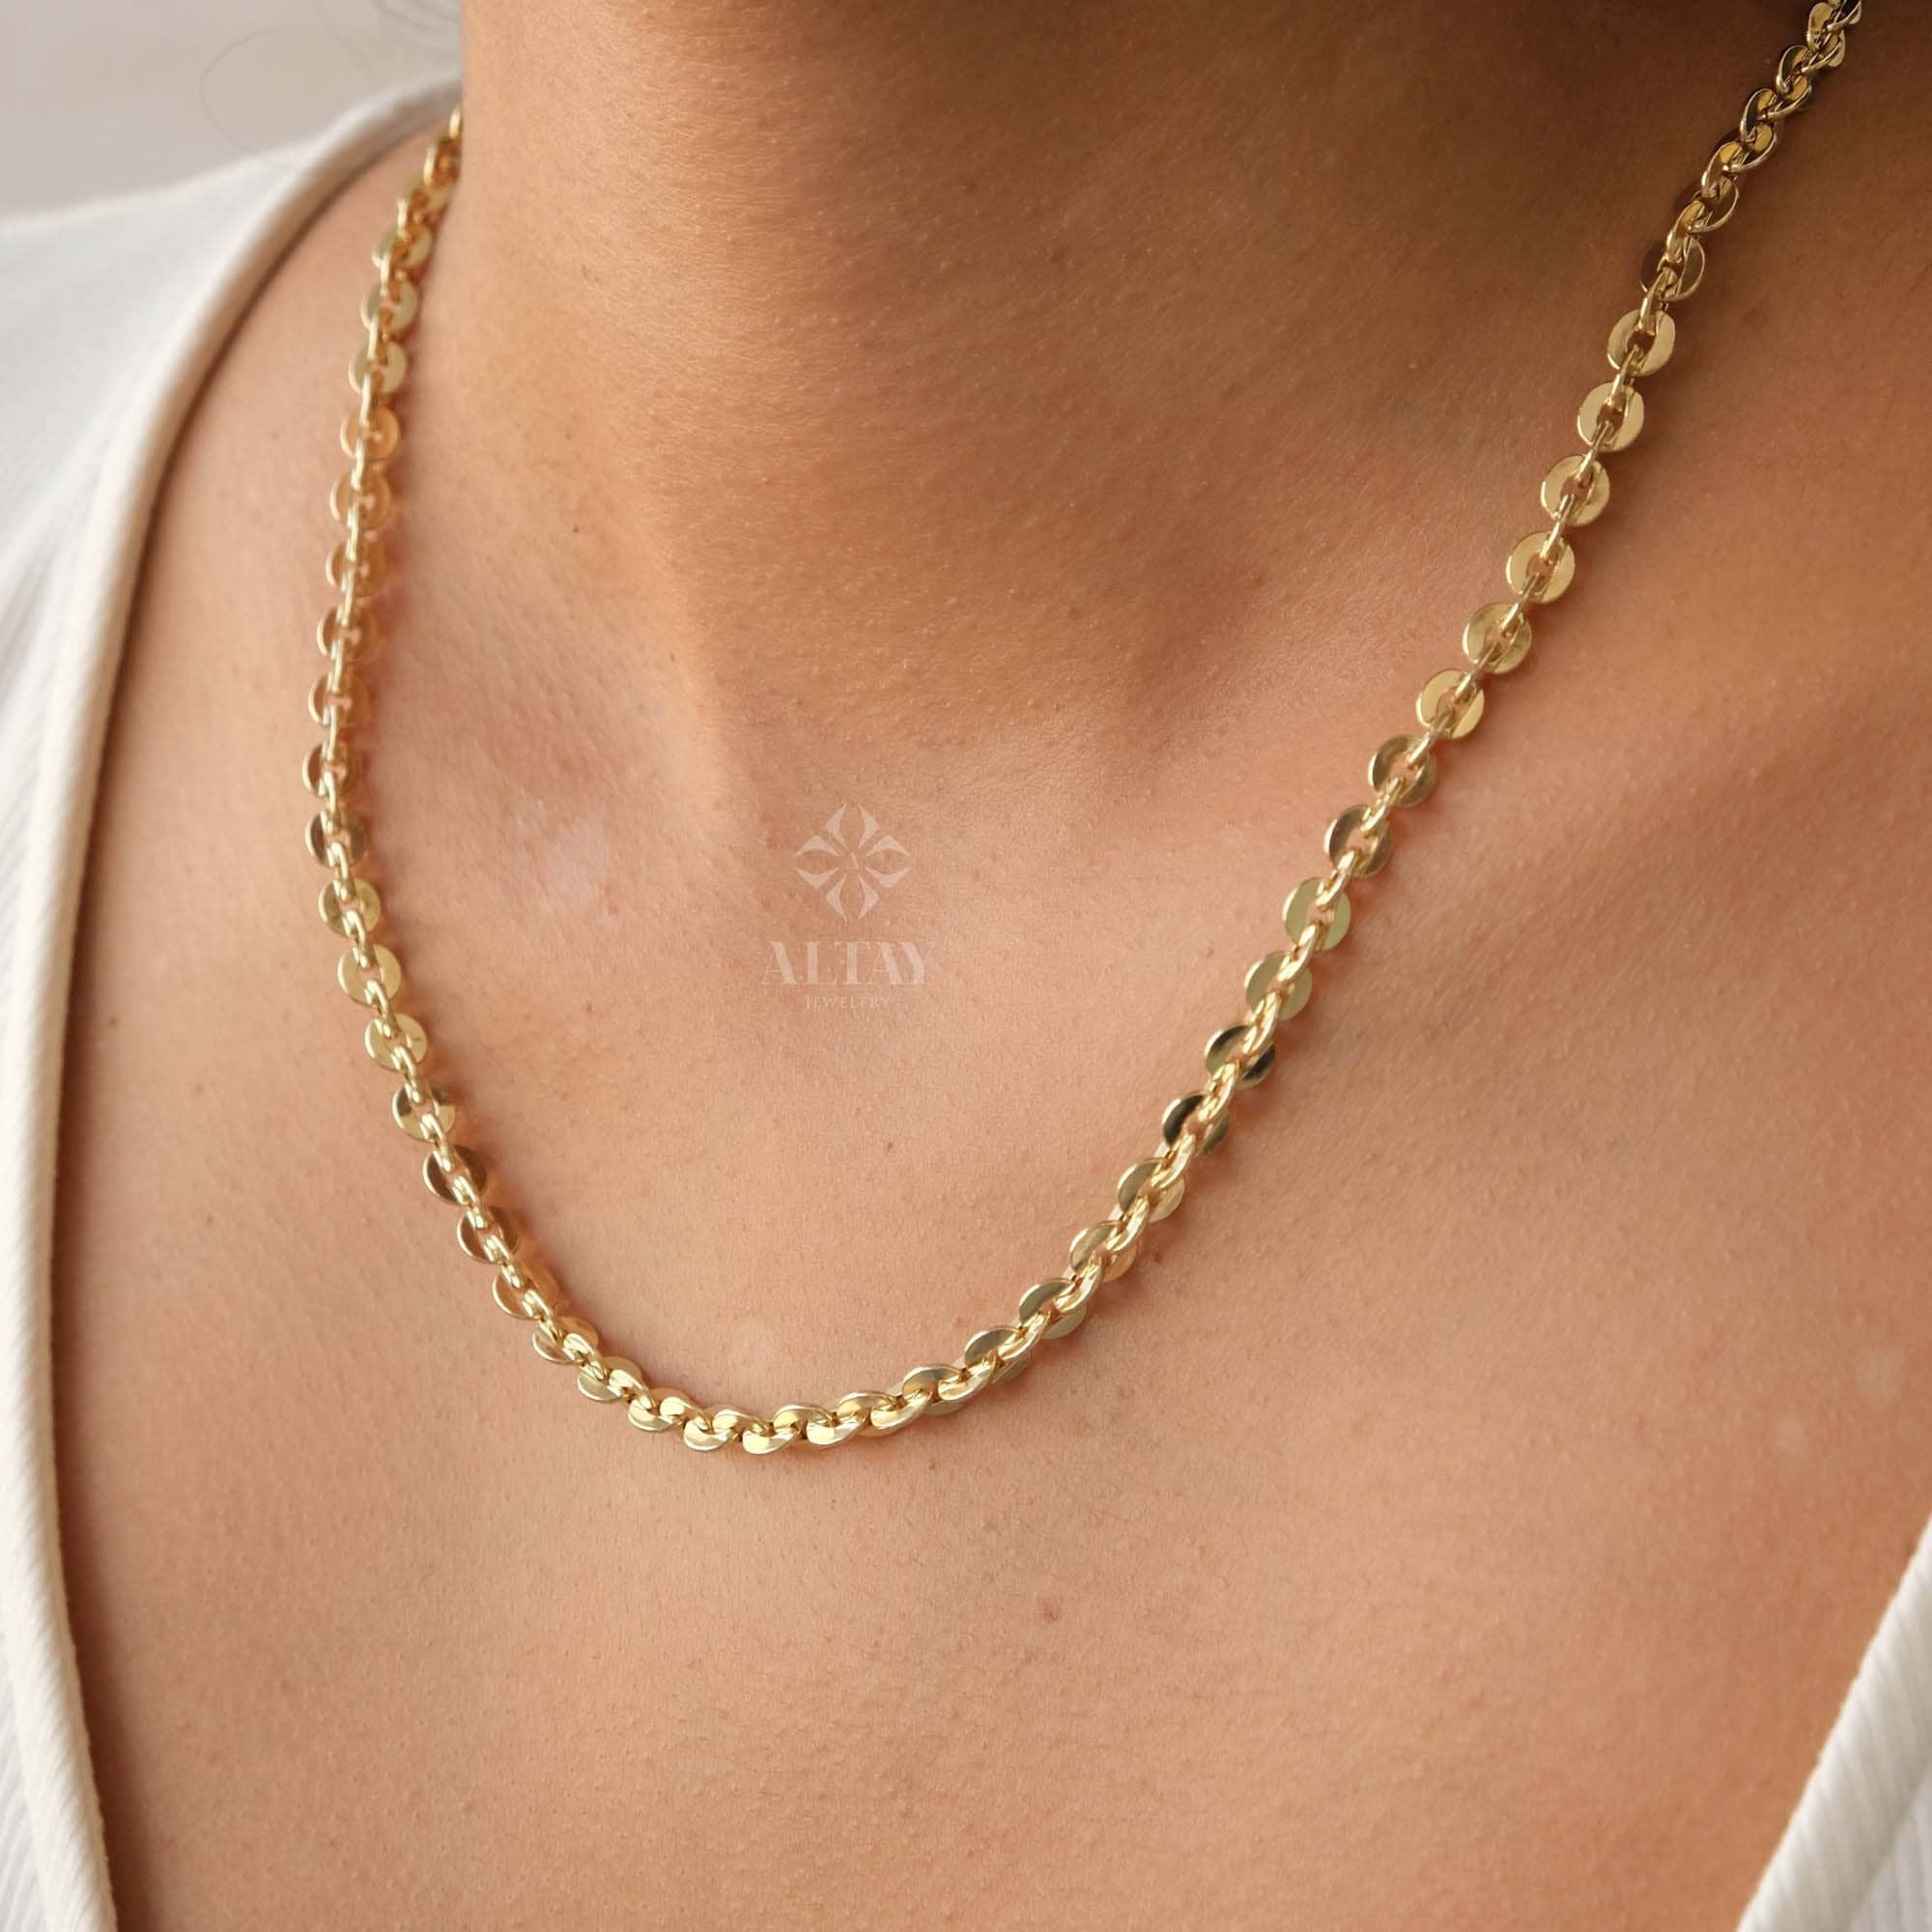 14K Gold Chain Necklace, Rolo Chain Choker, Oval Links Necklace, Chunky Chain Necklace, Cable Chain Necklace, Women Layering Necklace